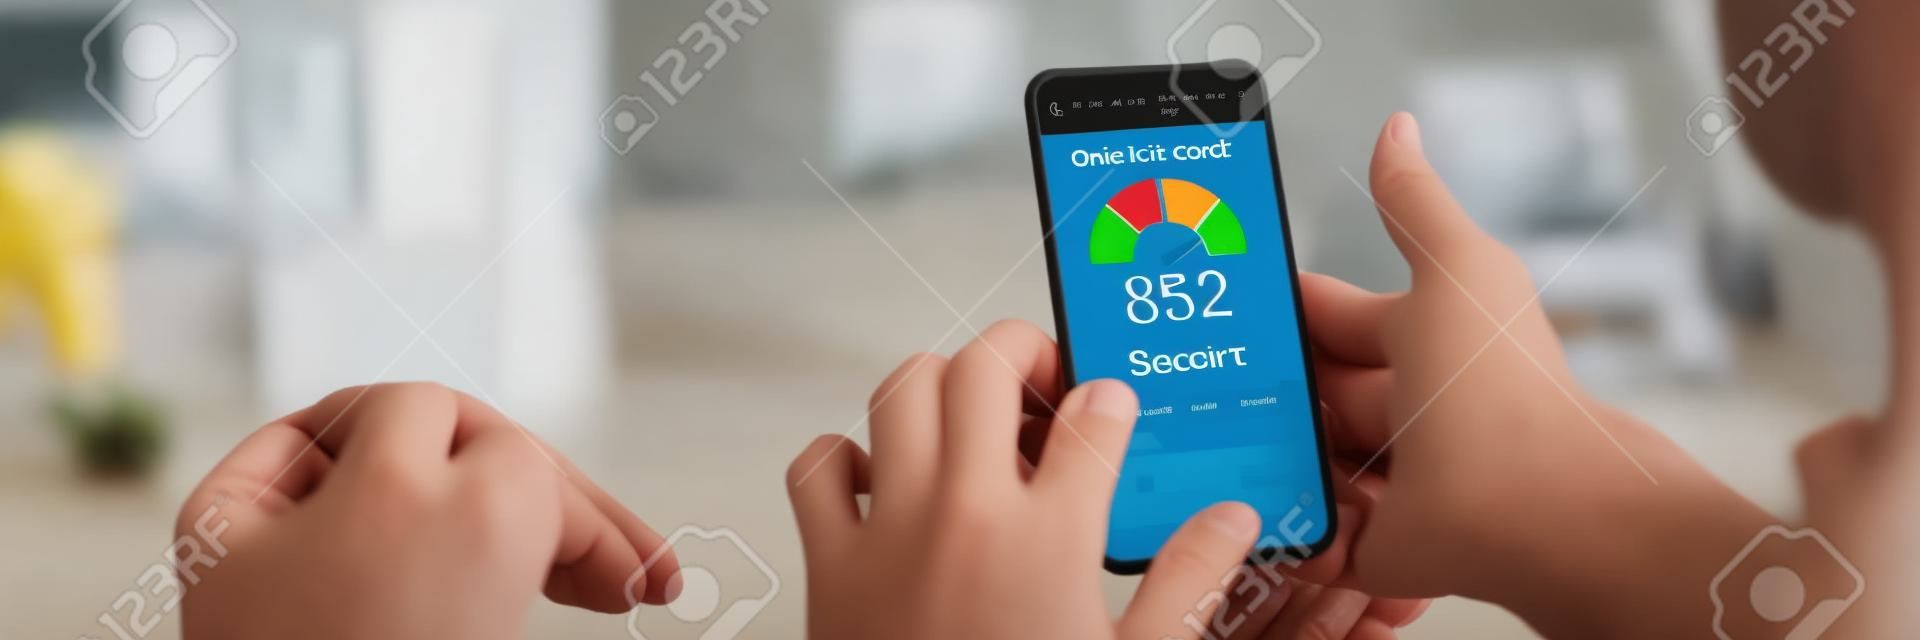 Online Credit Score Rating Check Using Smartphone